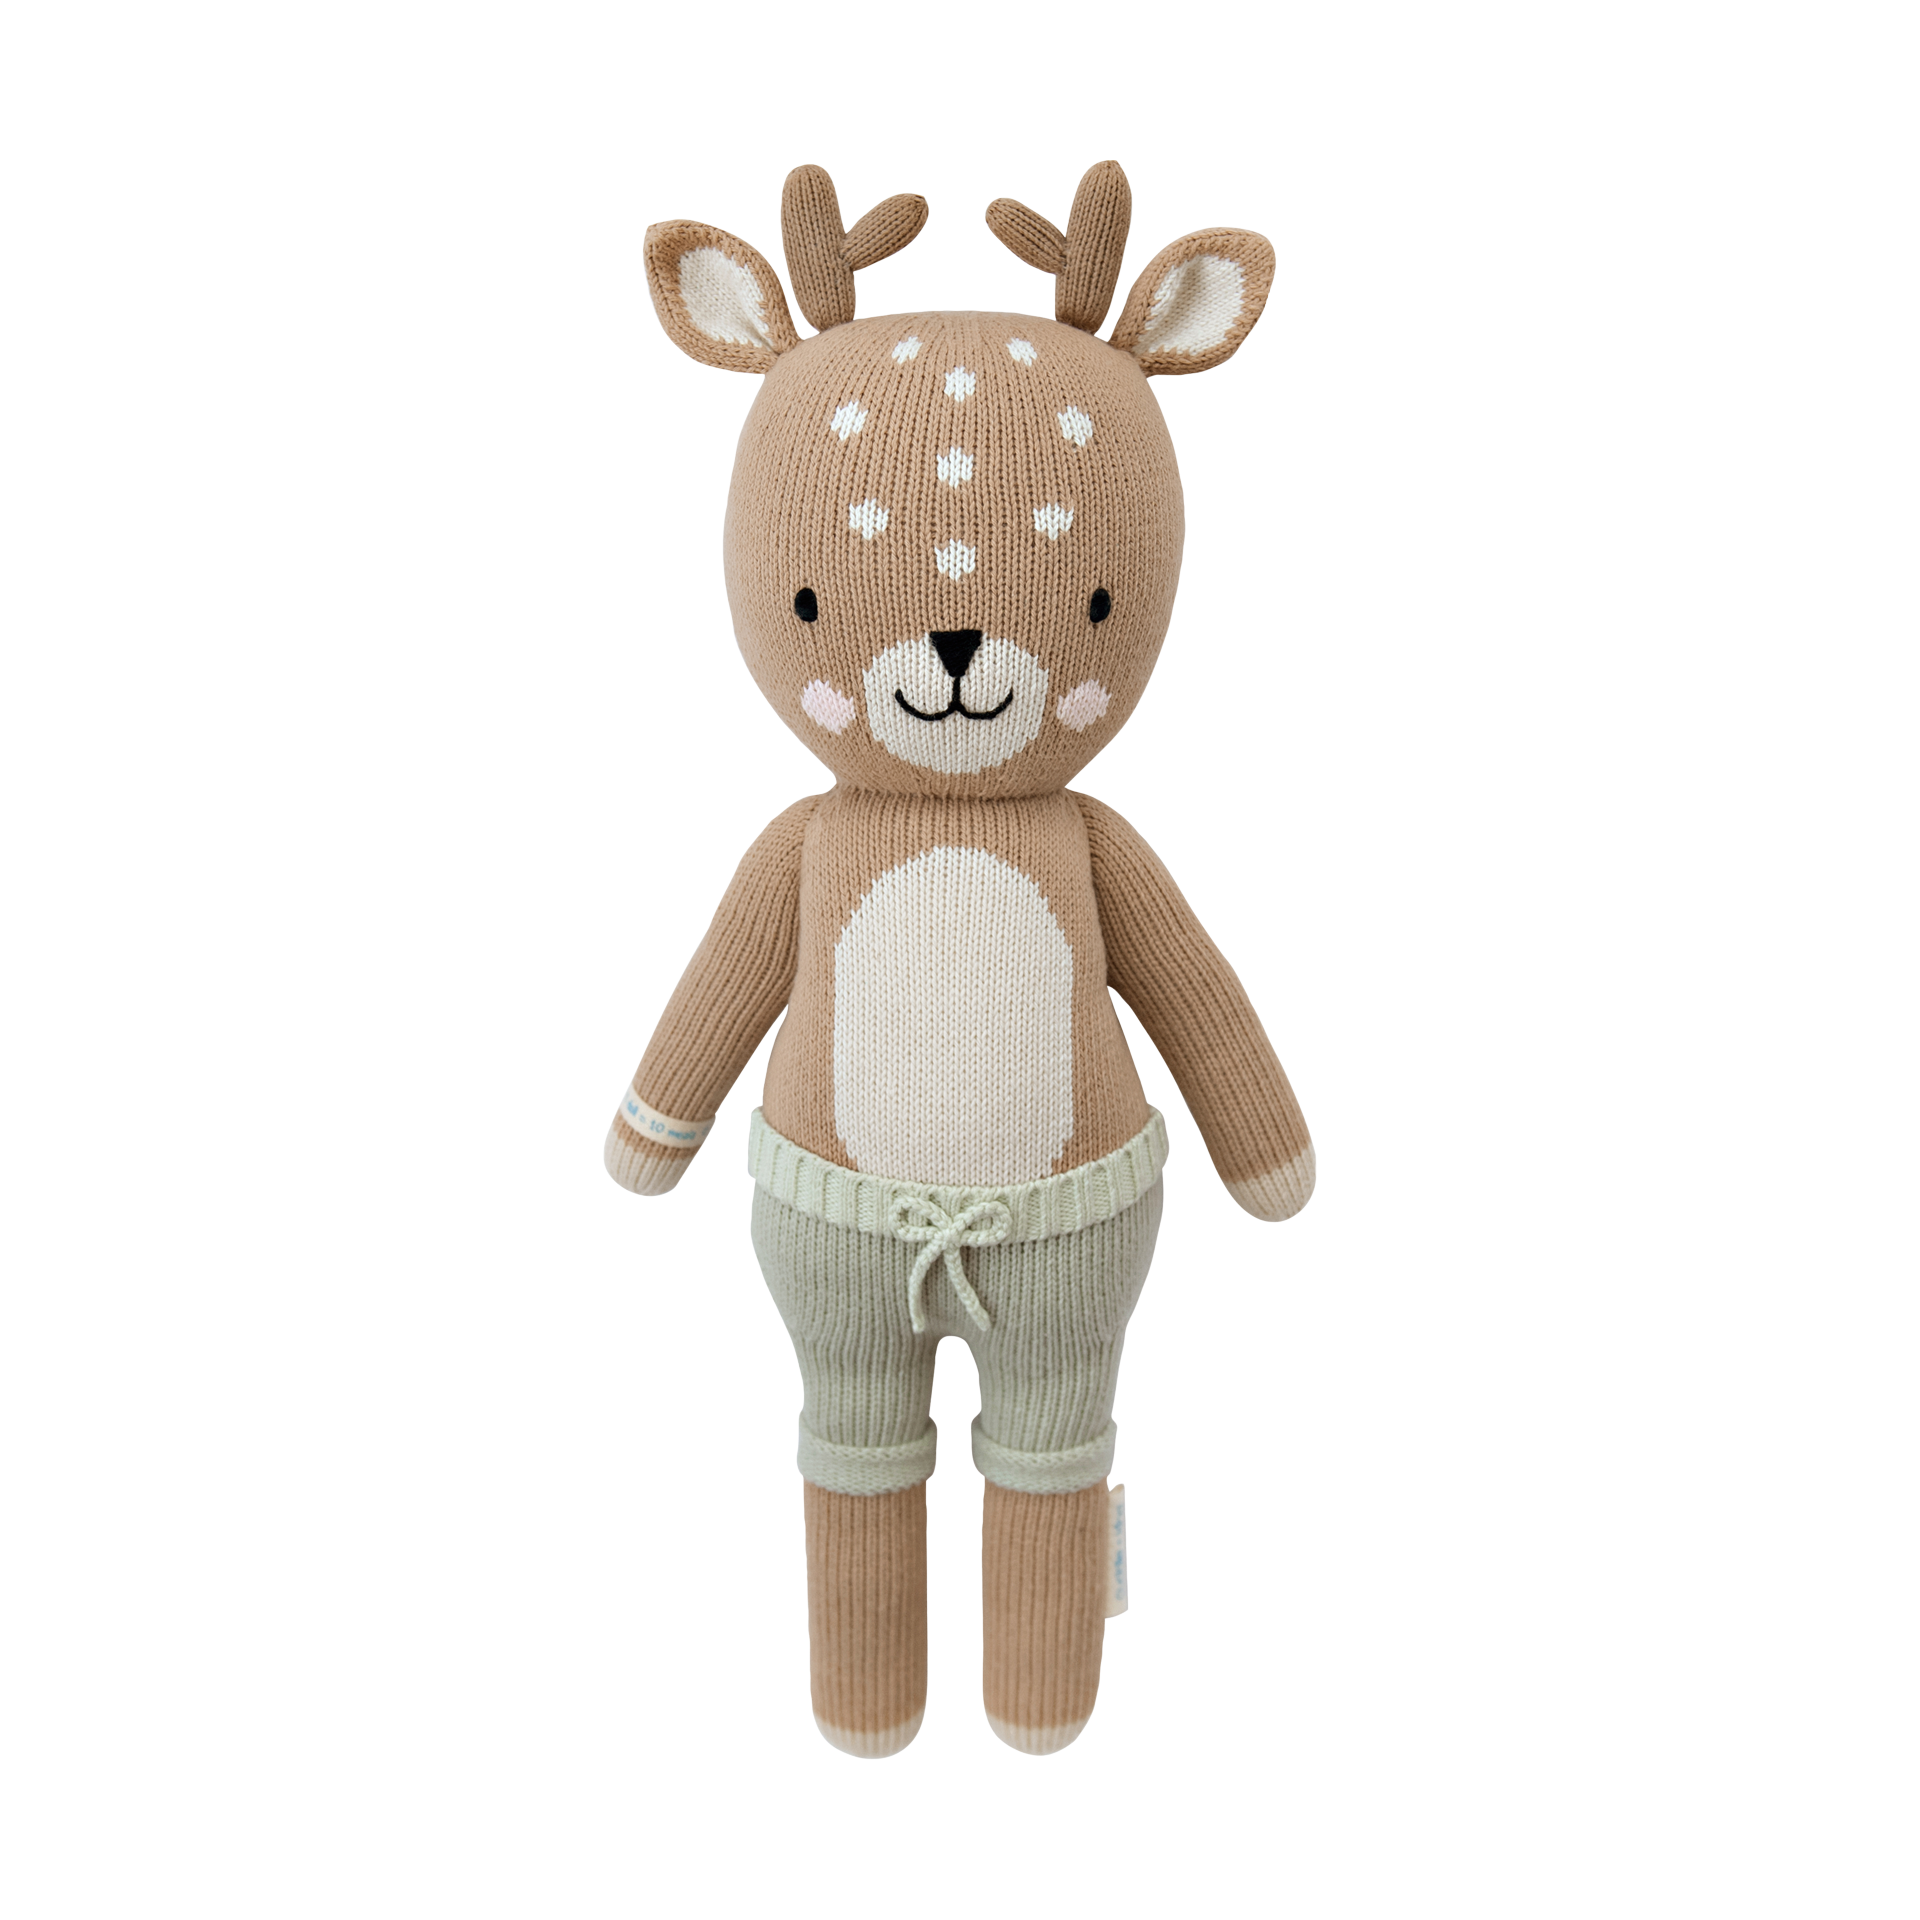 best cuddly toys for babies